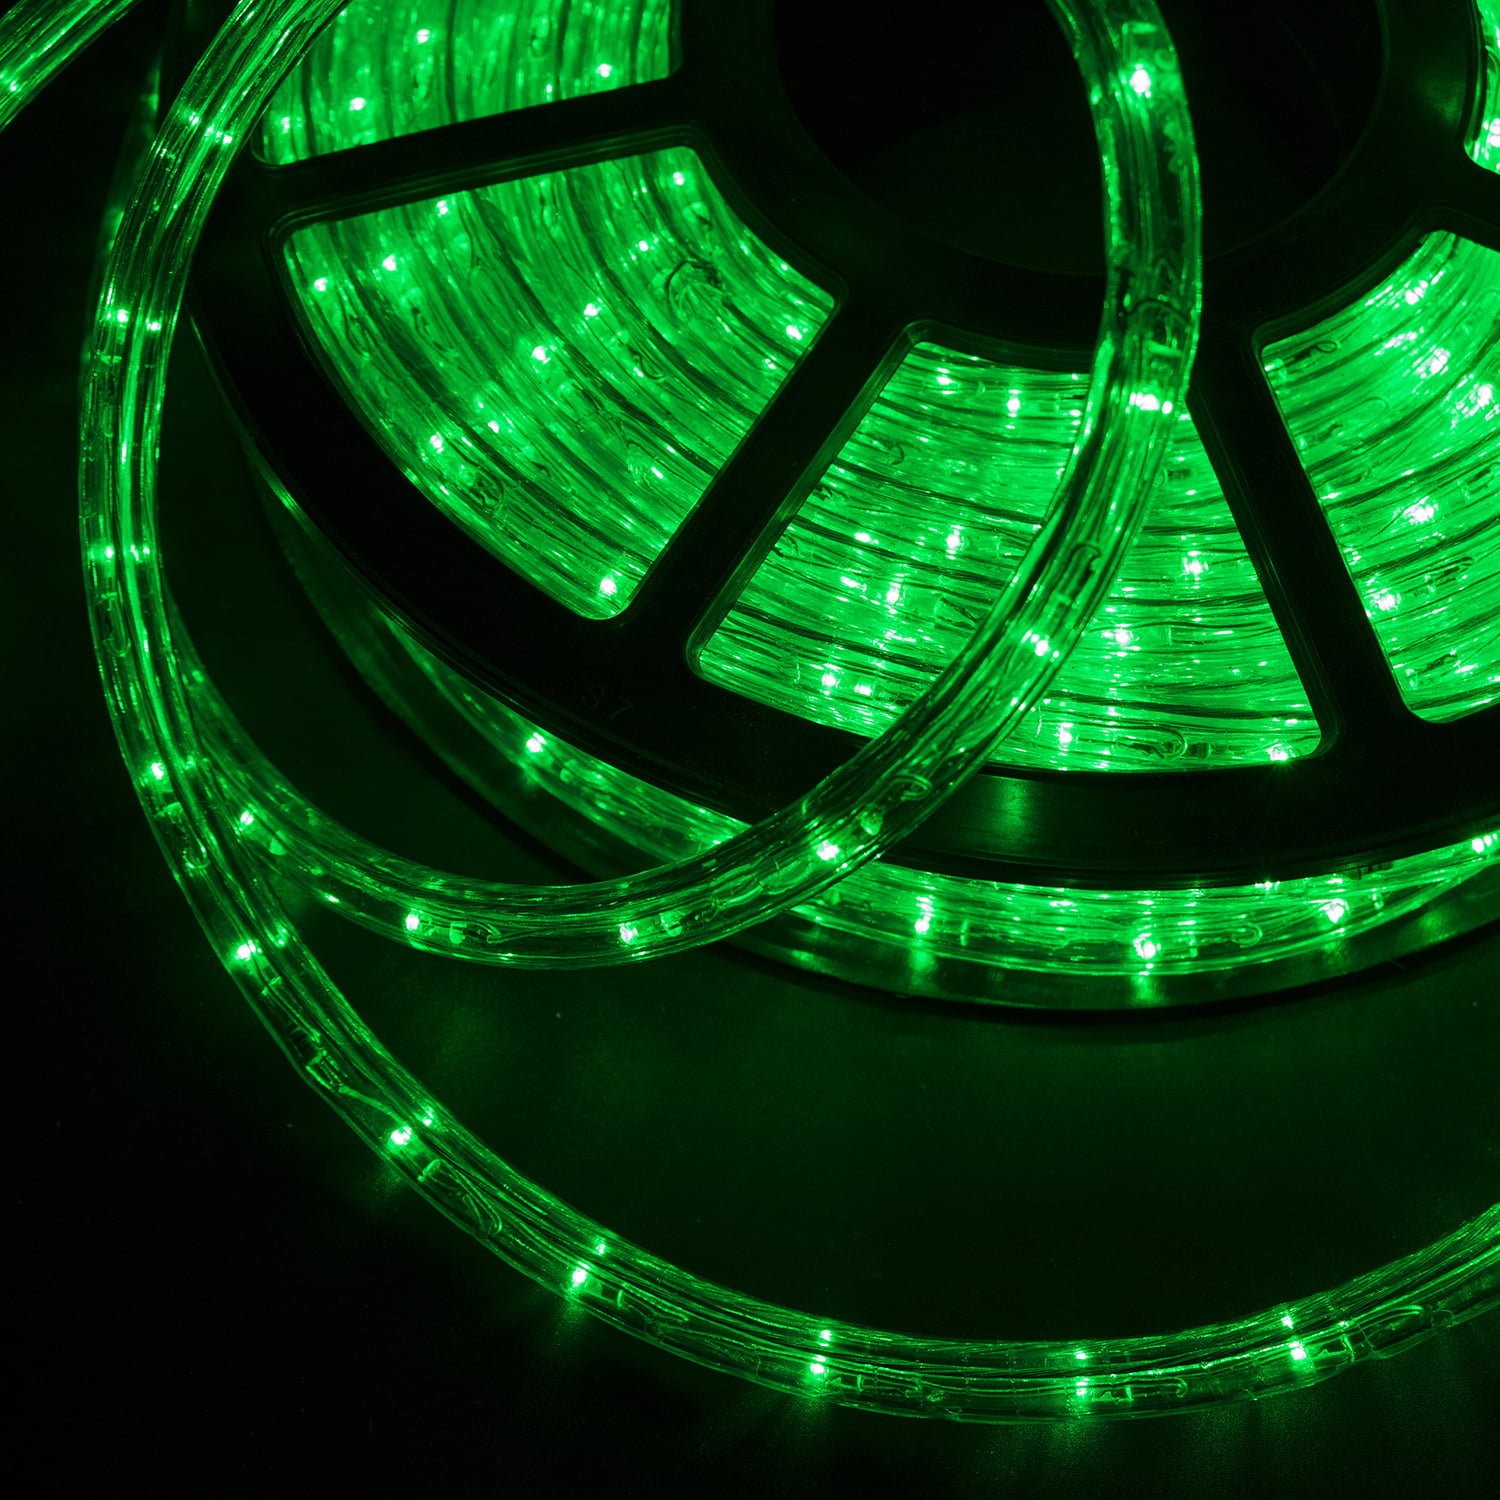 NEW FREE SHIPPING Details about   Celebrations Rope Lights 216 Green Lights 18' 